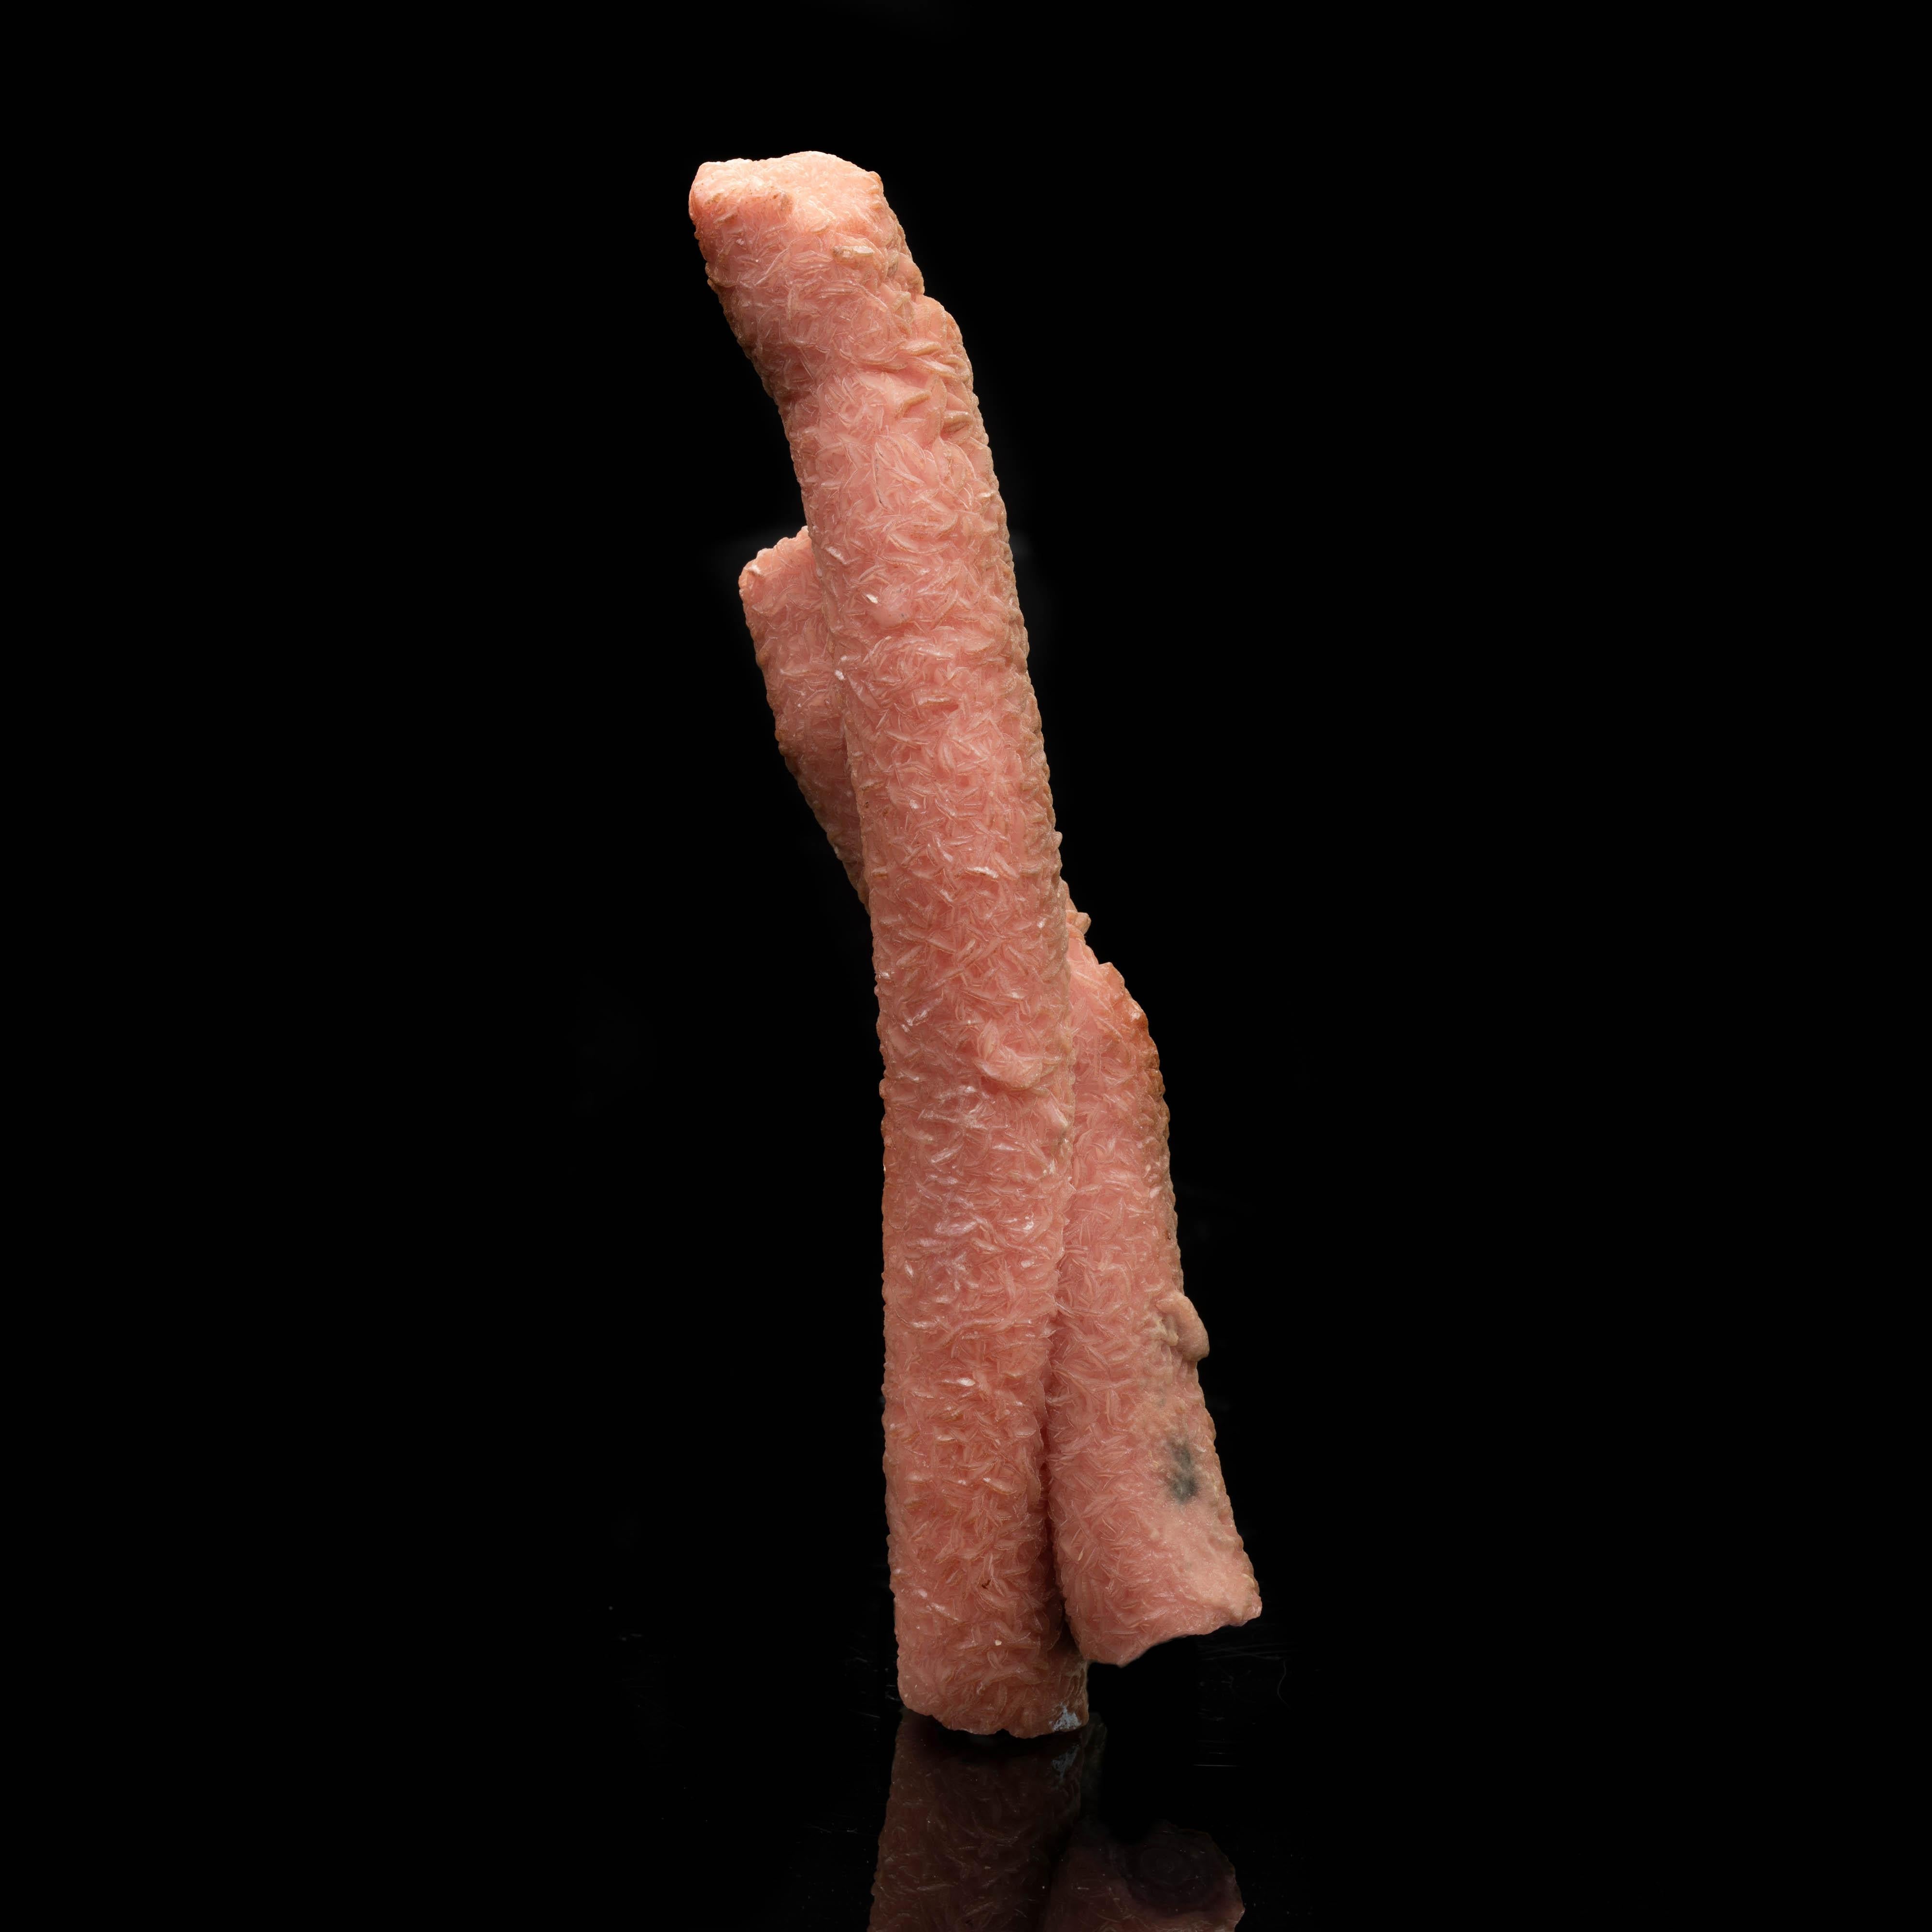 These unique rhodochrosite stalactites from Argentina are a rare find. Formed from precipitation off of manganese-rich rocks inside the tunnels of Argentinian silver mines and only found in the 13th century, they grew over hundreds of years into